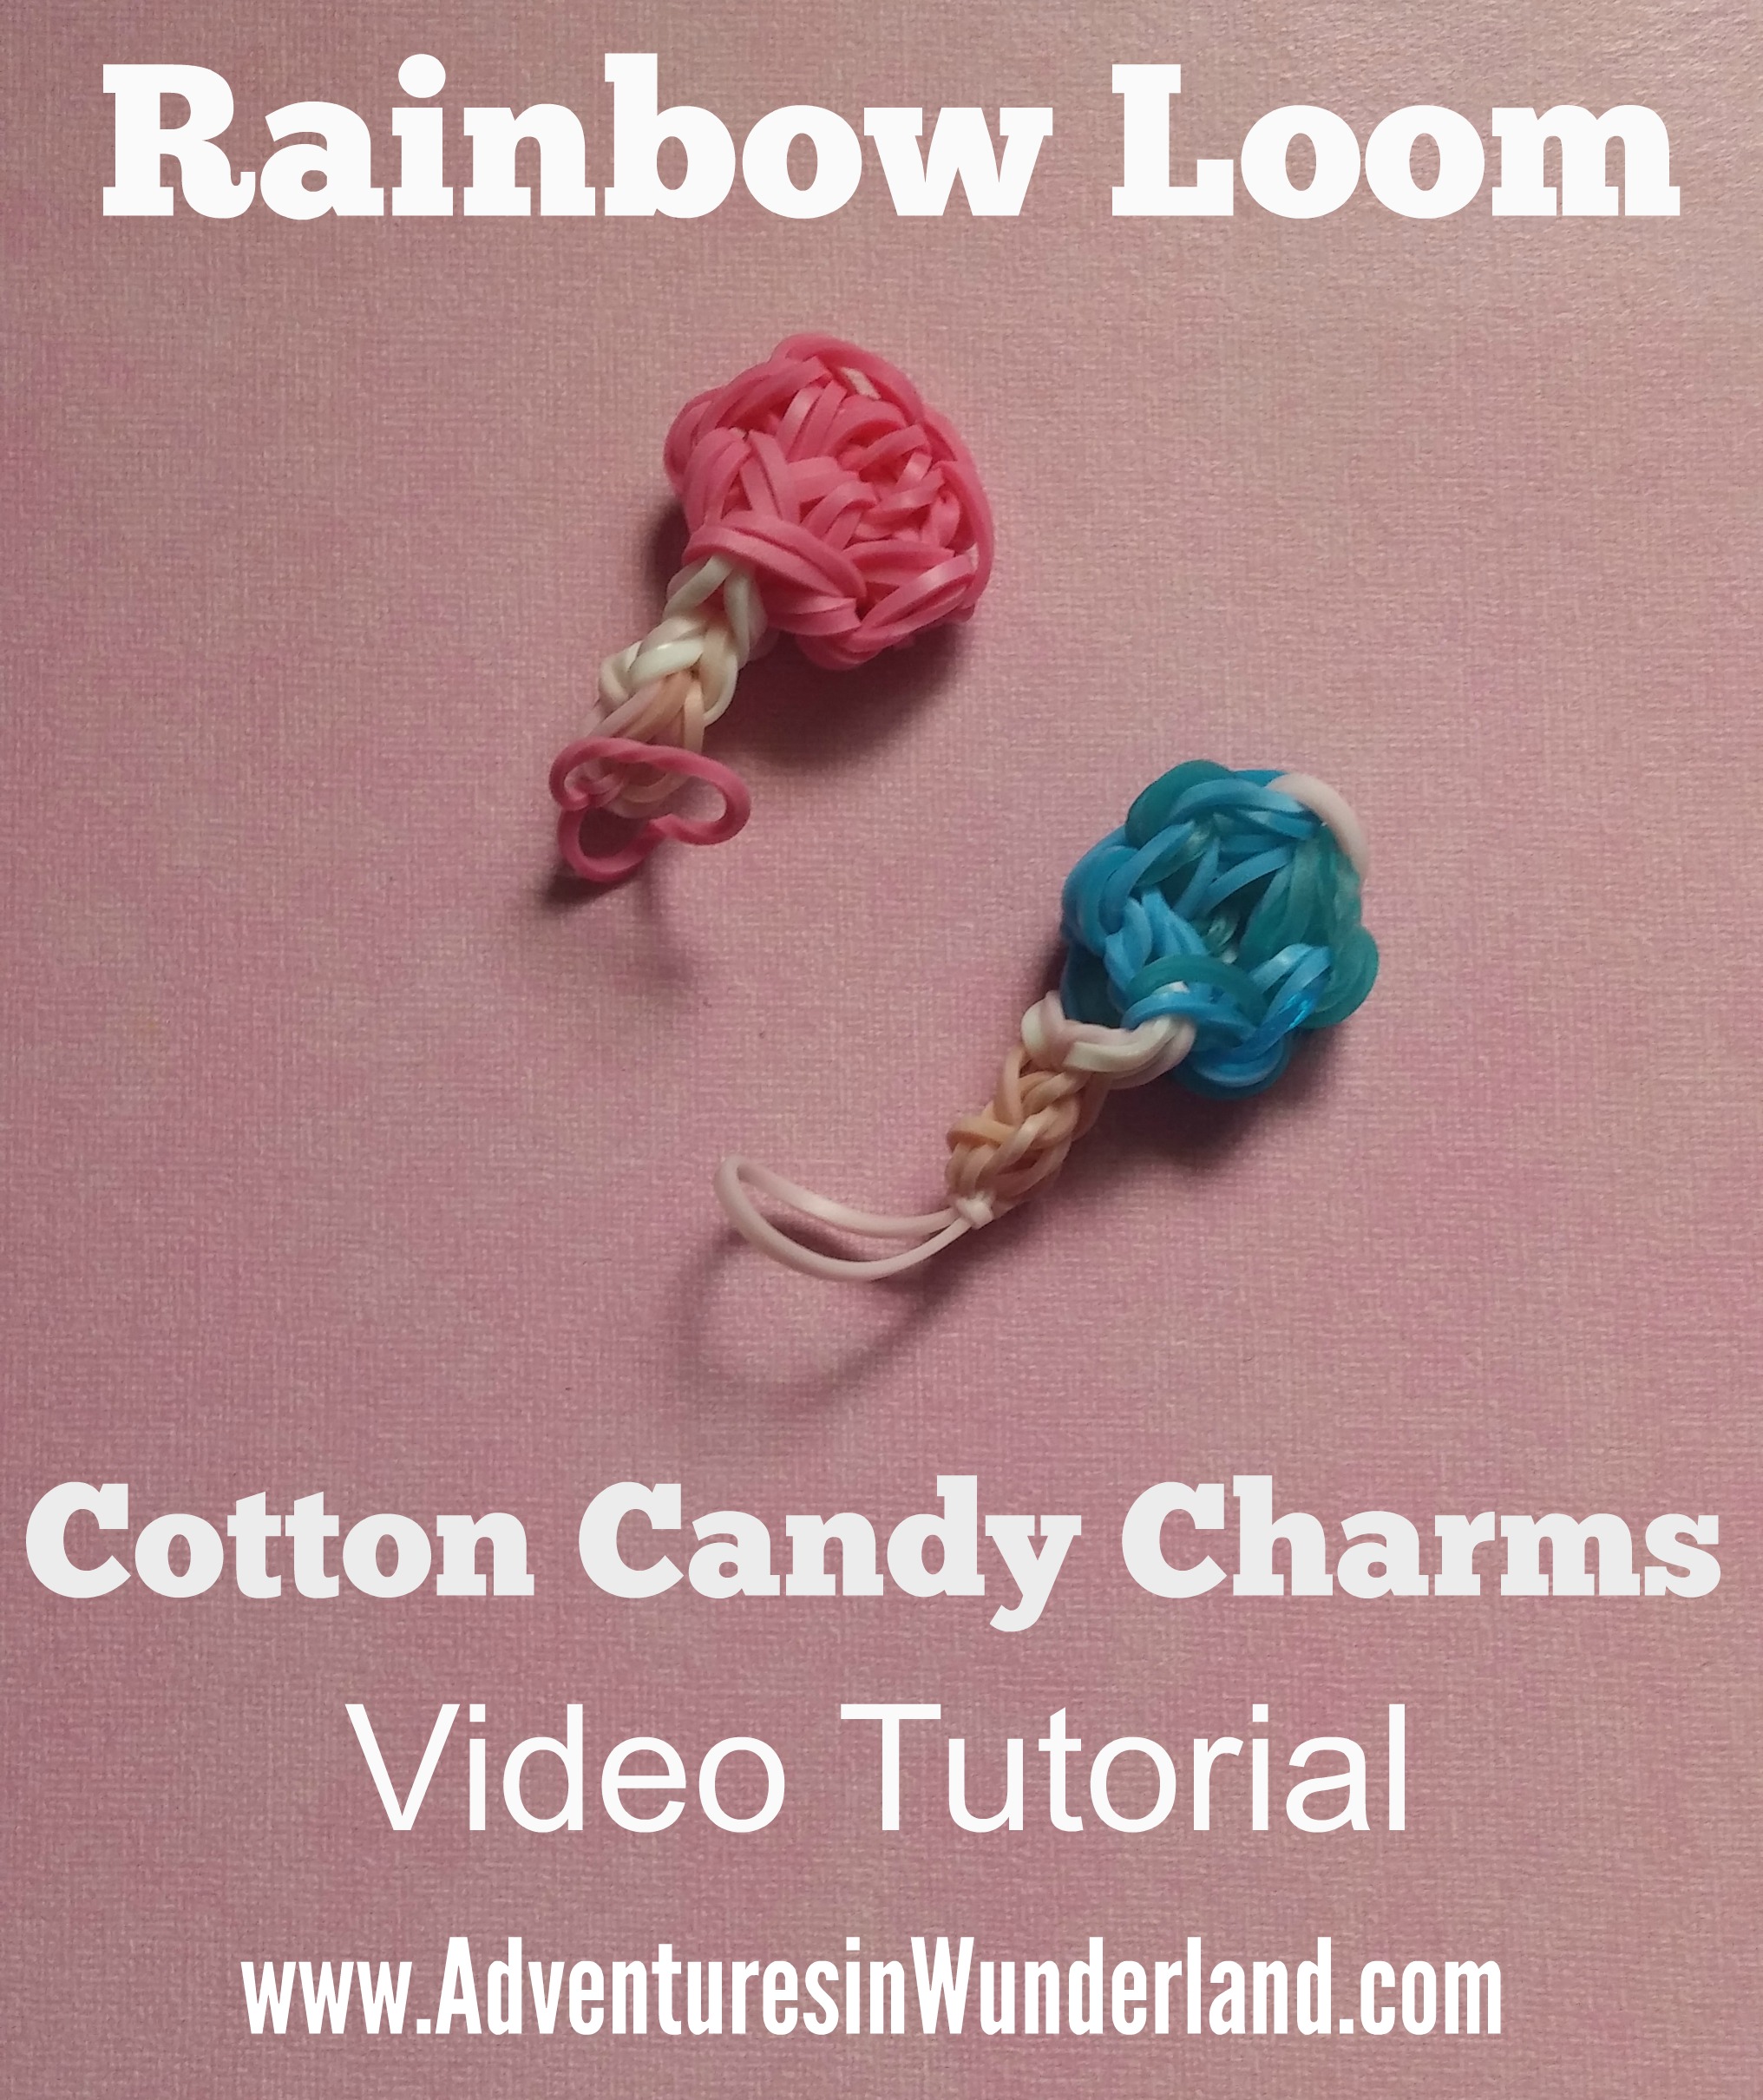 Best of Candy charms new videos